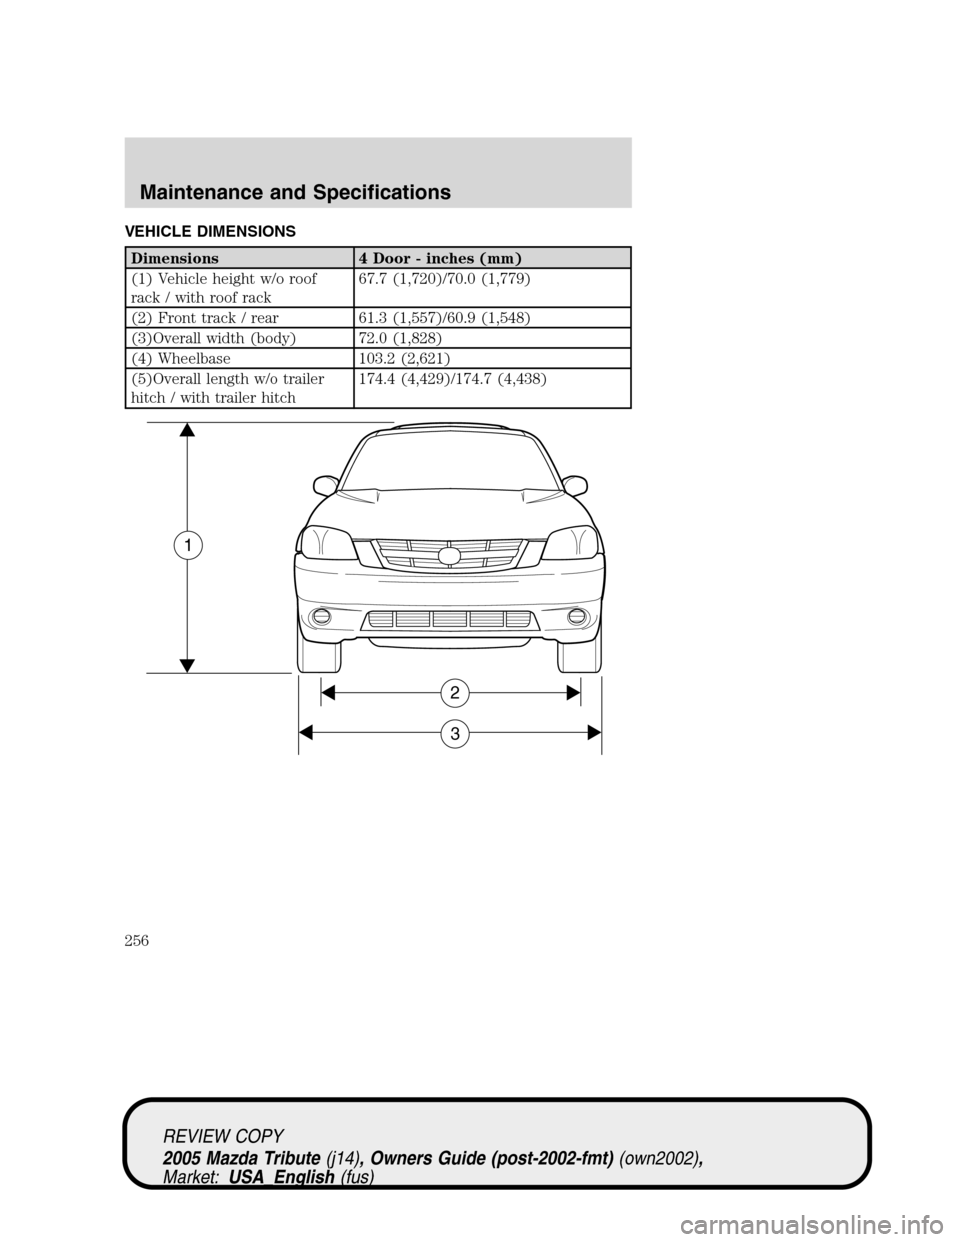 MAZDA MODEL TRIBUTE 2005  Owners Manual (in English) VEHICLE DIMENSIONS
Dimensions 4 Door - inches (mm)
(1) Vehicle height w/o roof
rack / with roof rack67.7 (1,720)/70.0 (1,779)
(2) Front track / rear 61.3 (1,557)/60.9 (1,548)
(3)Overall width (body) 7